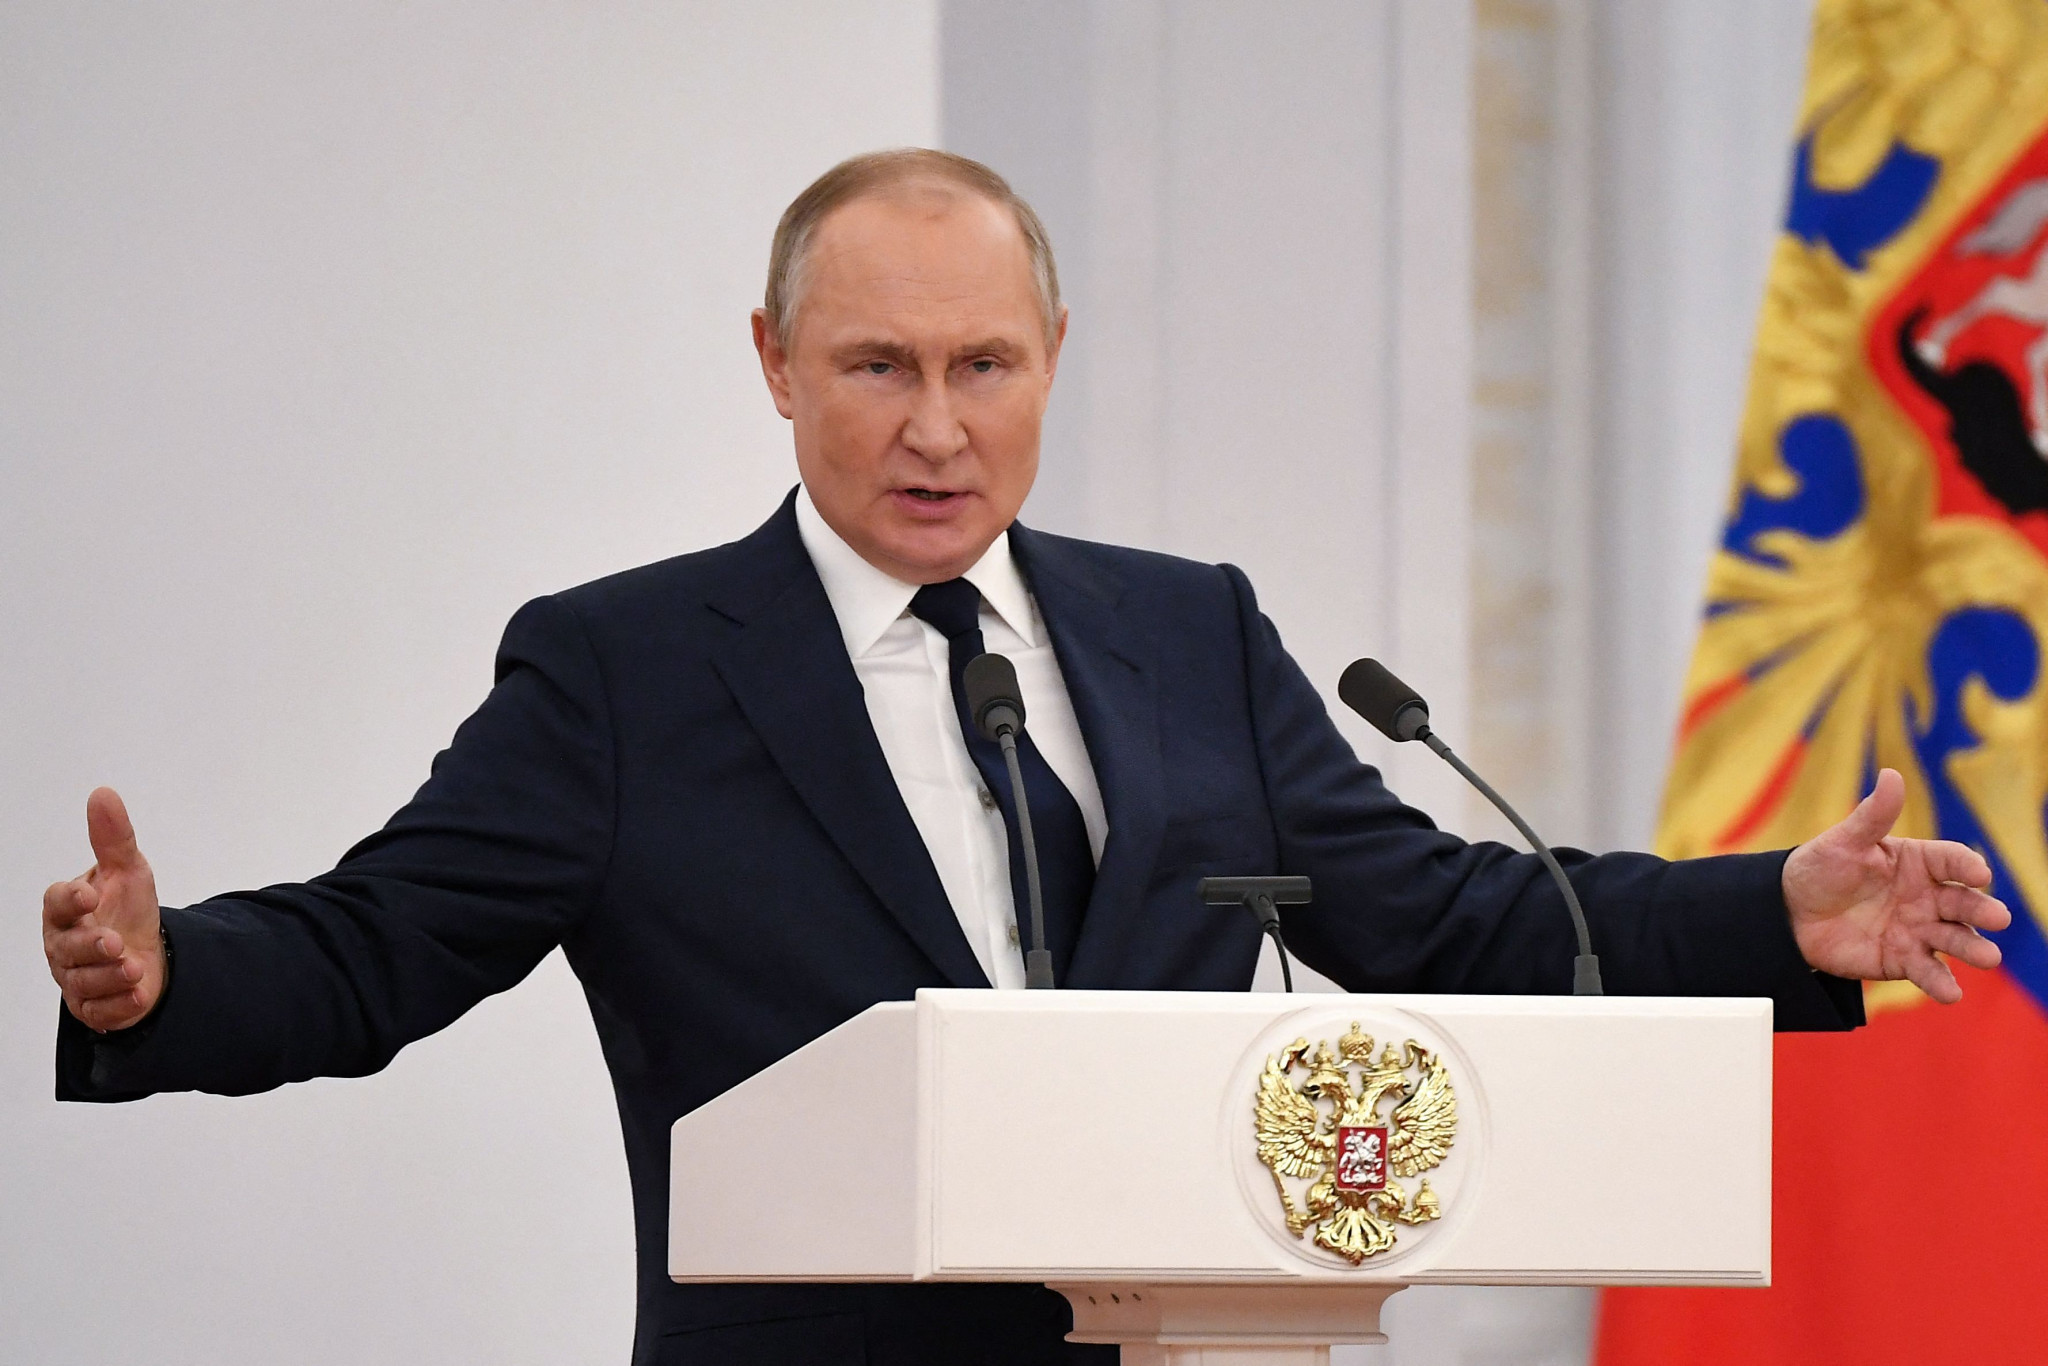 Putin claims Russia open to hosting sports events "without discrimination"